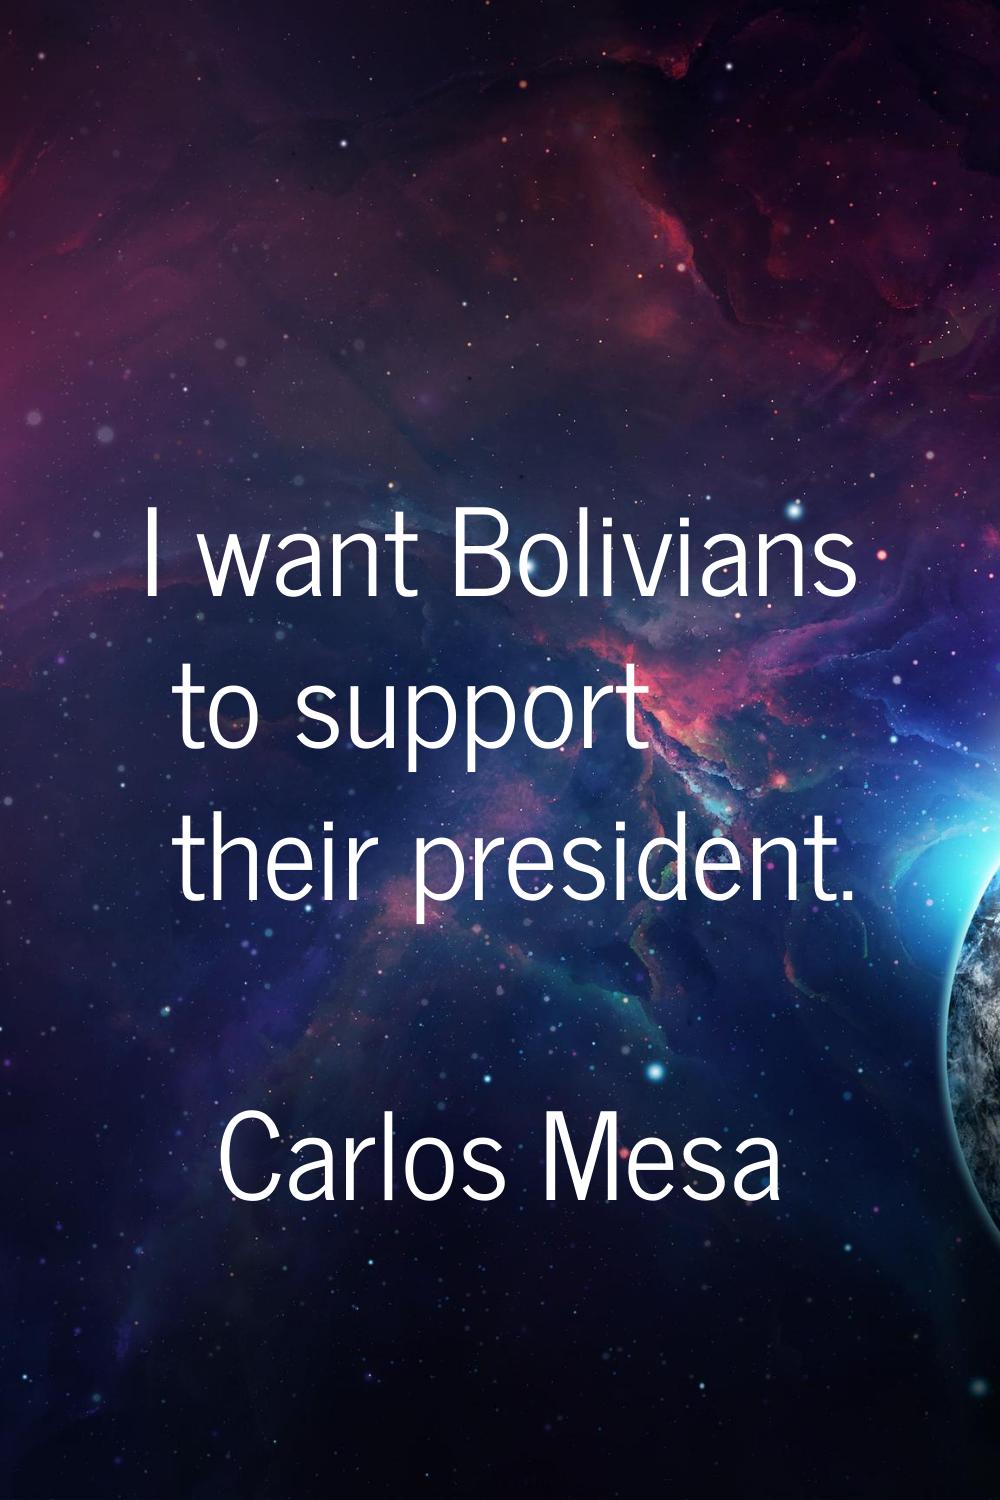 I want Bolivians to support their president.